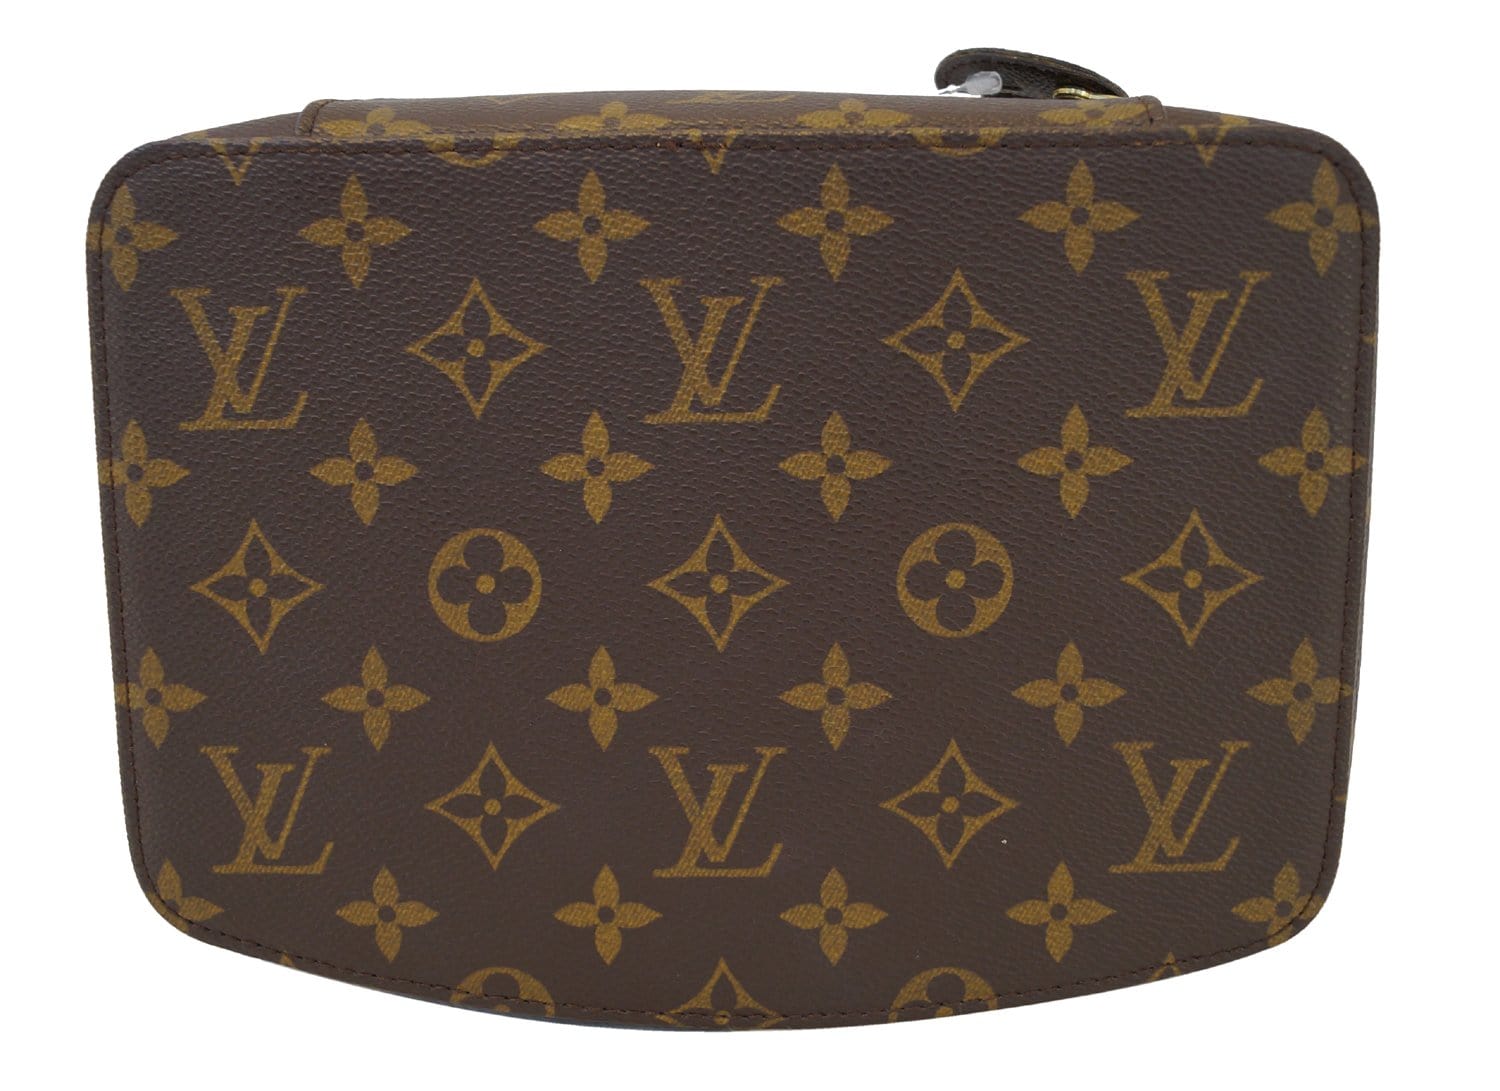 AUTHENTIC LOUIS VUITTON MONTE-CARLO JEWELRY CASE for